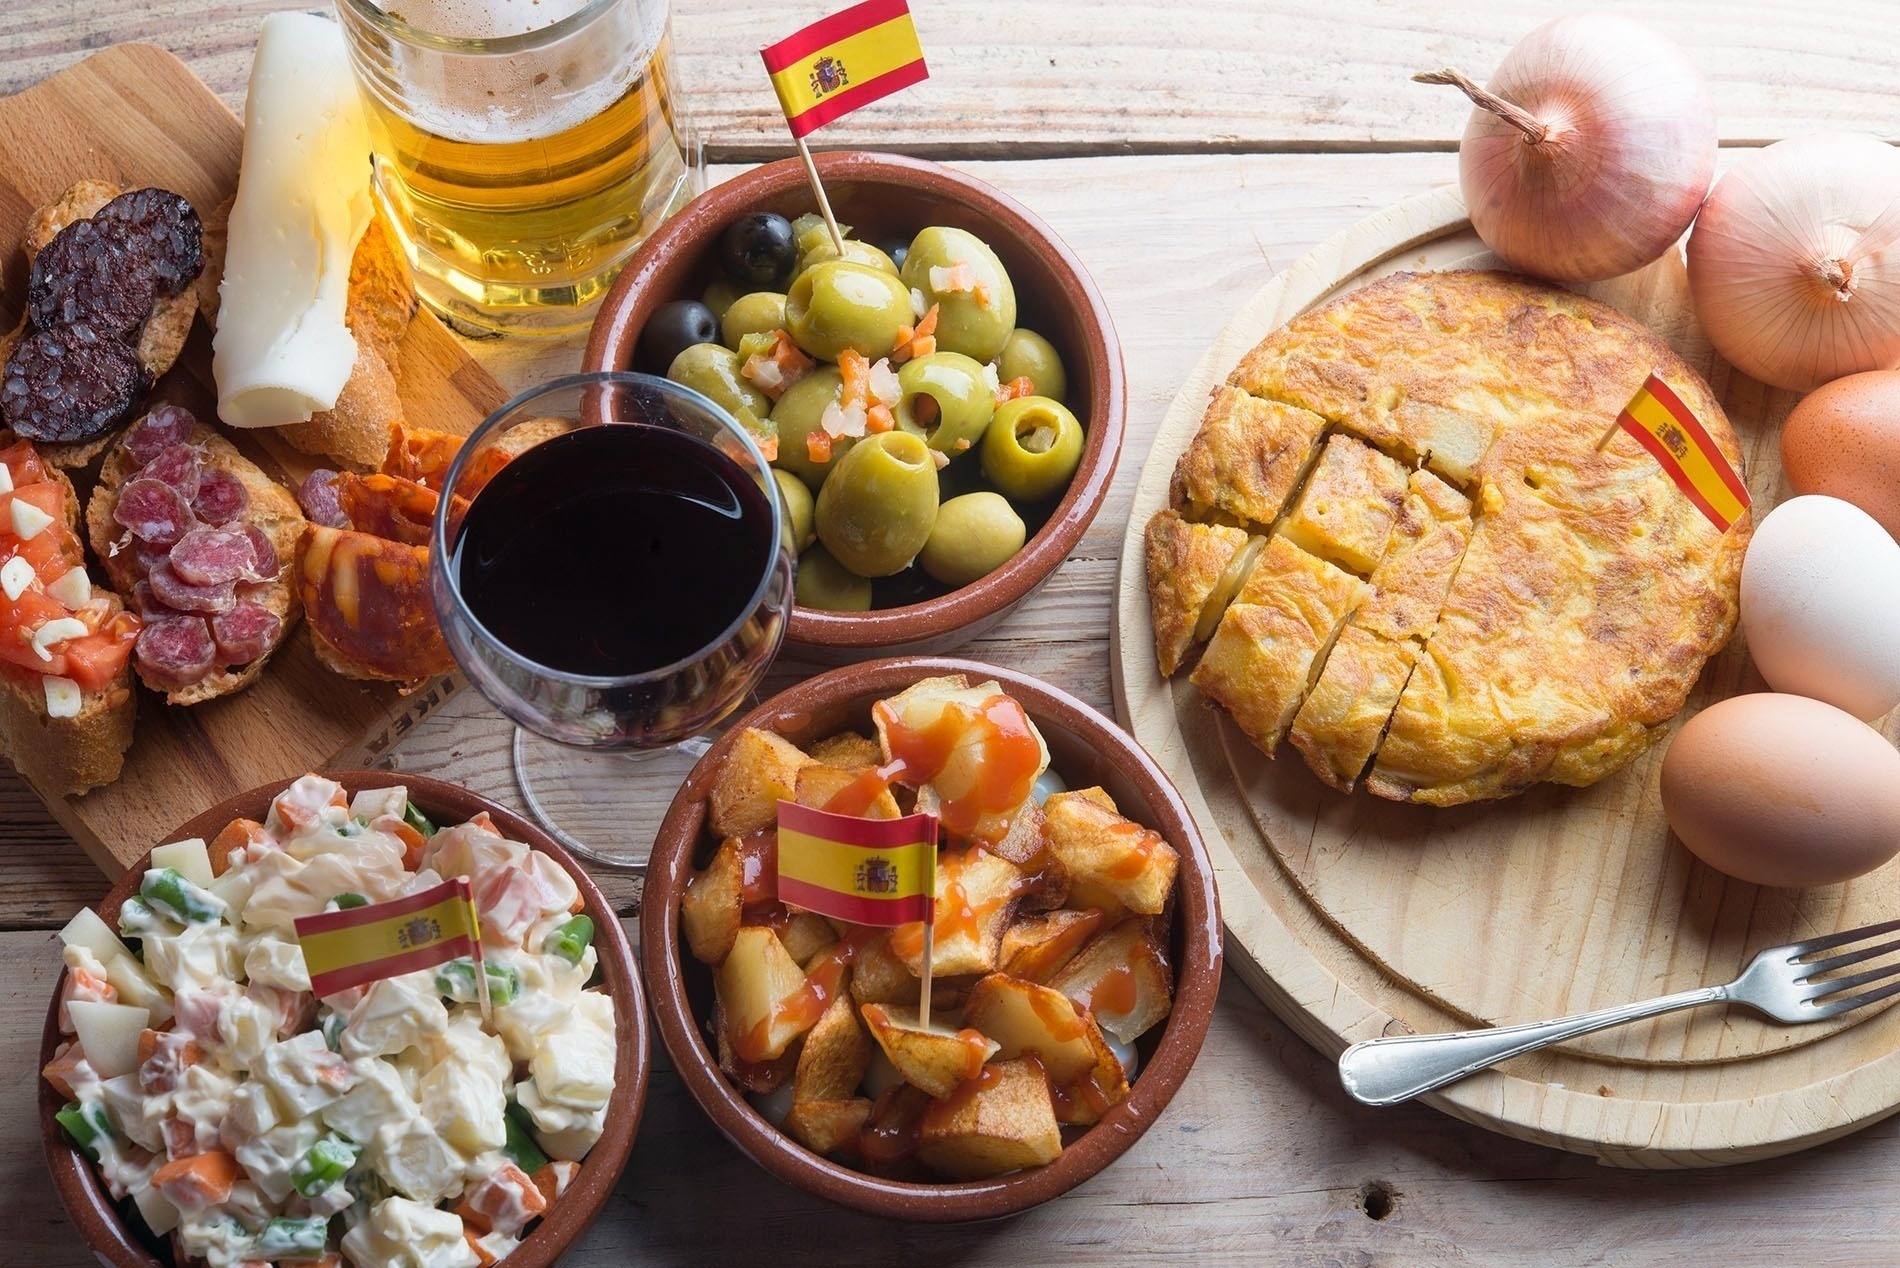 Curiosities about Spanish food